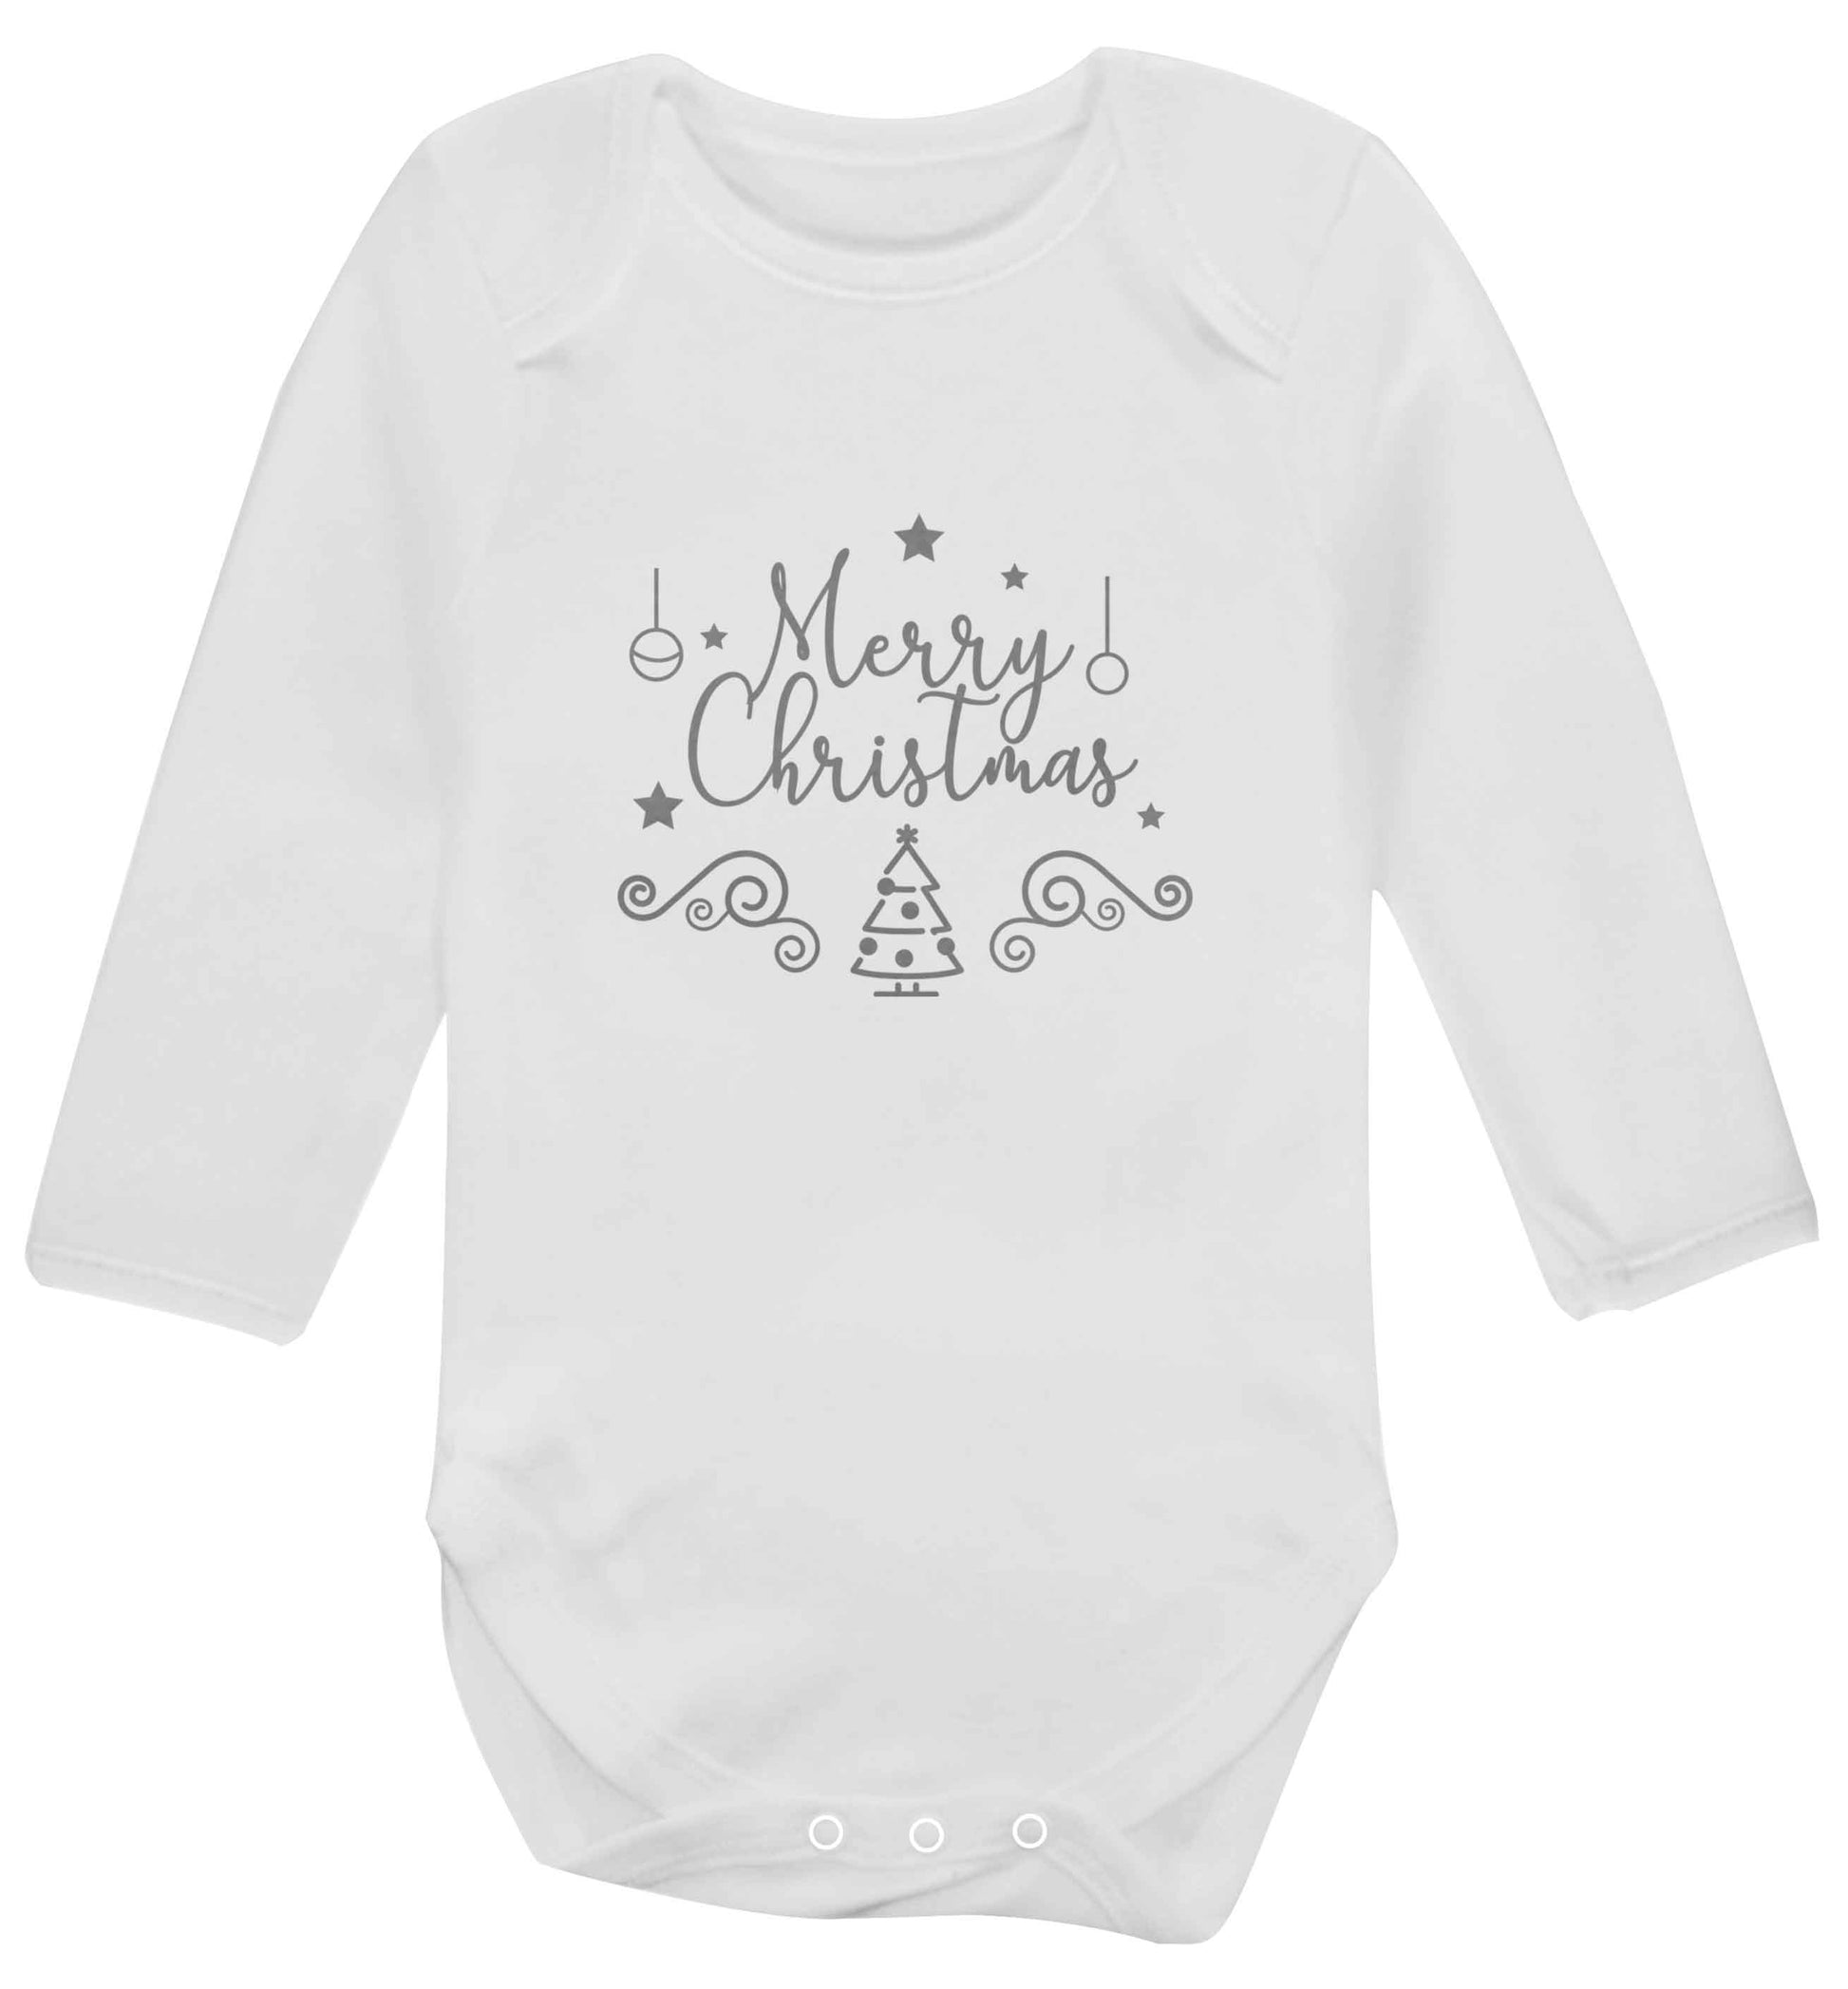 Happy New Year 2023 baby vest long sleeved white 6-12 months